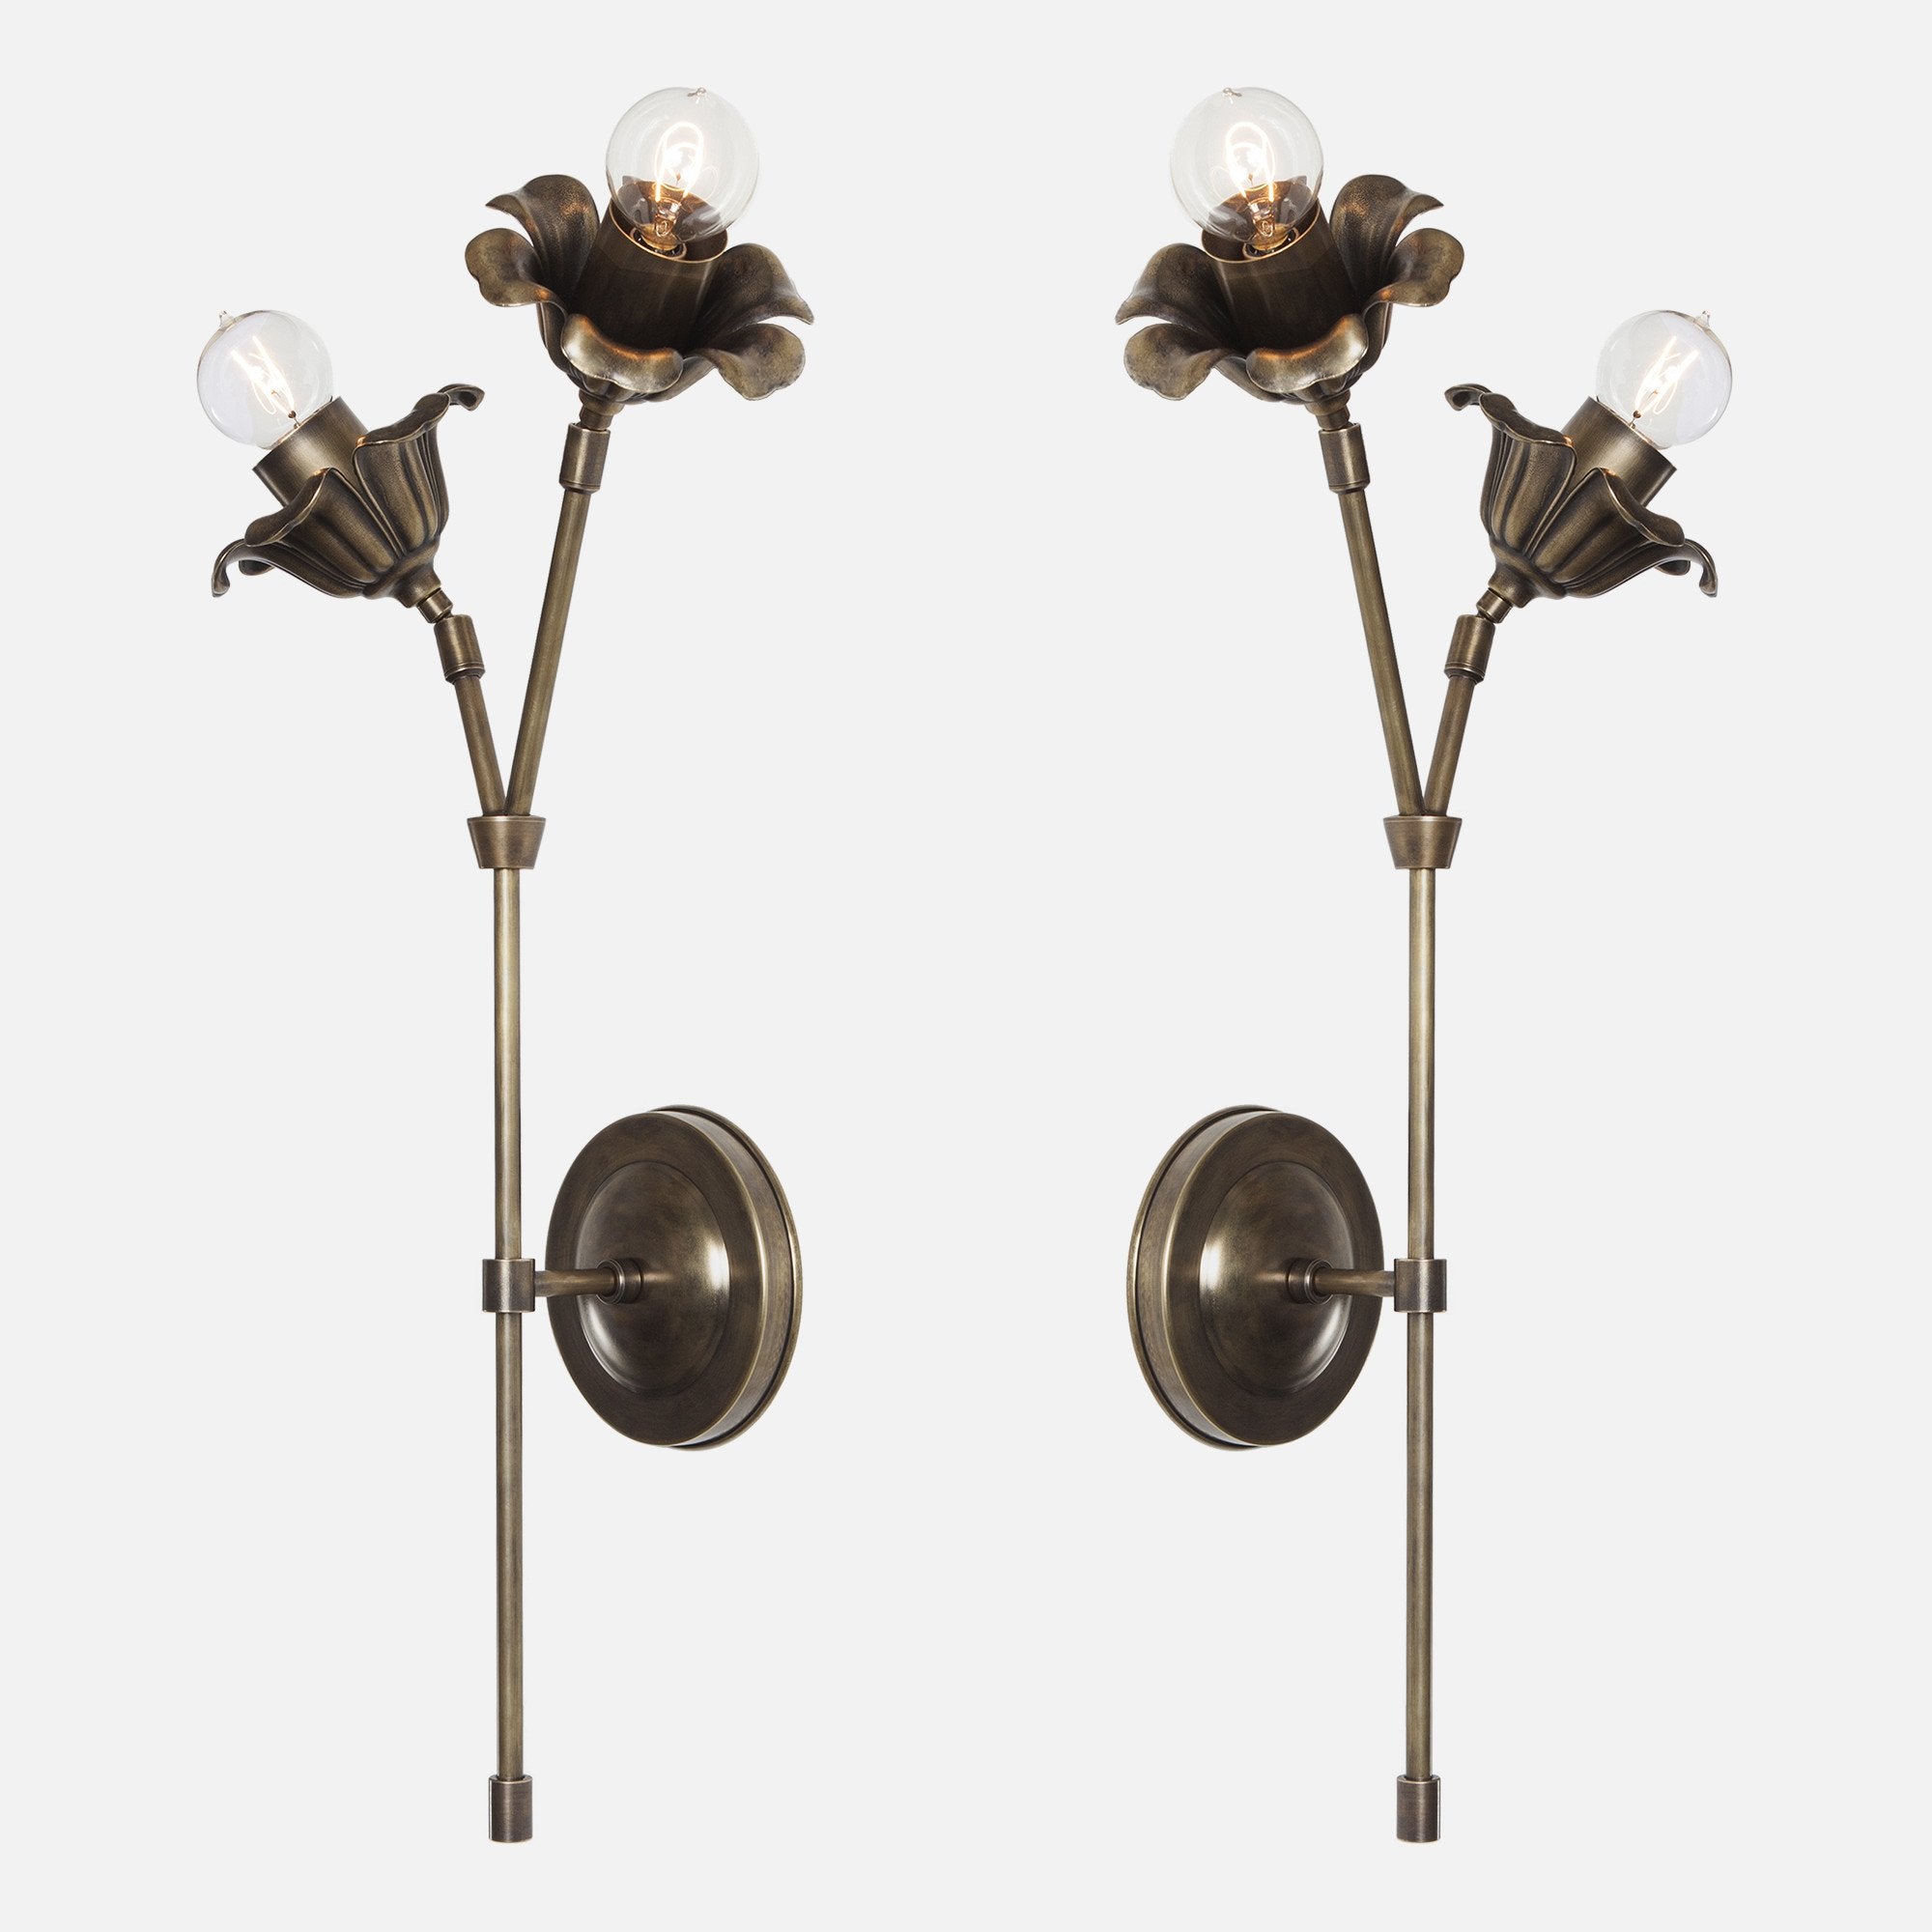 Bloom Double Stem Wall Sconce Mirrored Pair in Vintage Brass